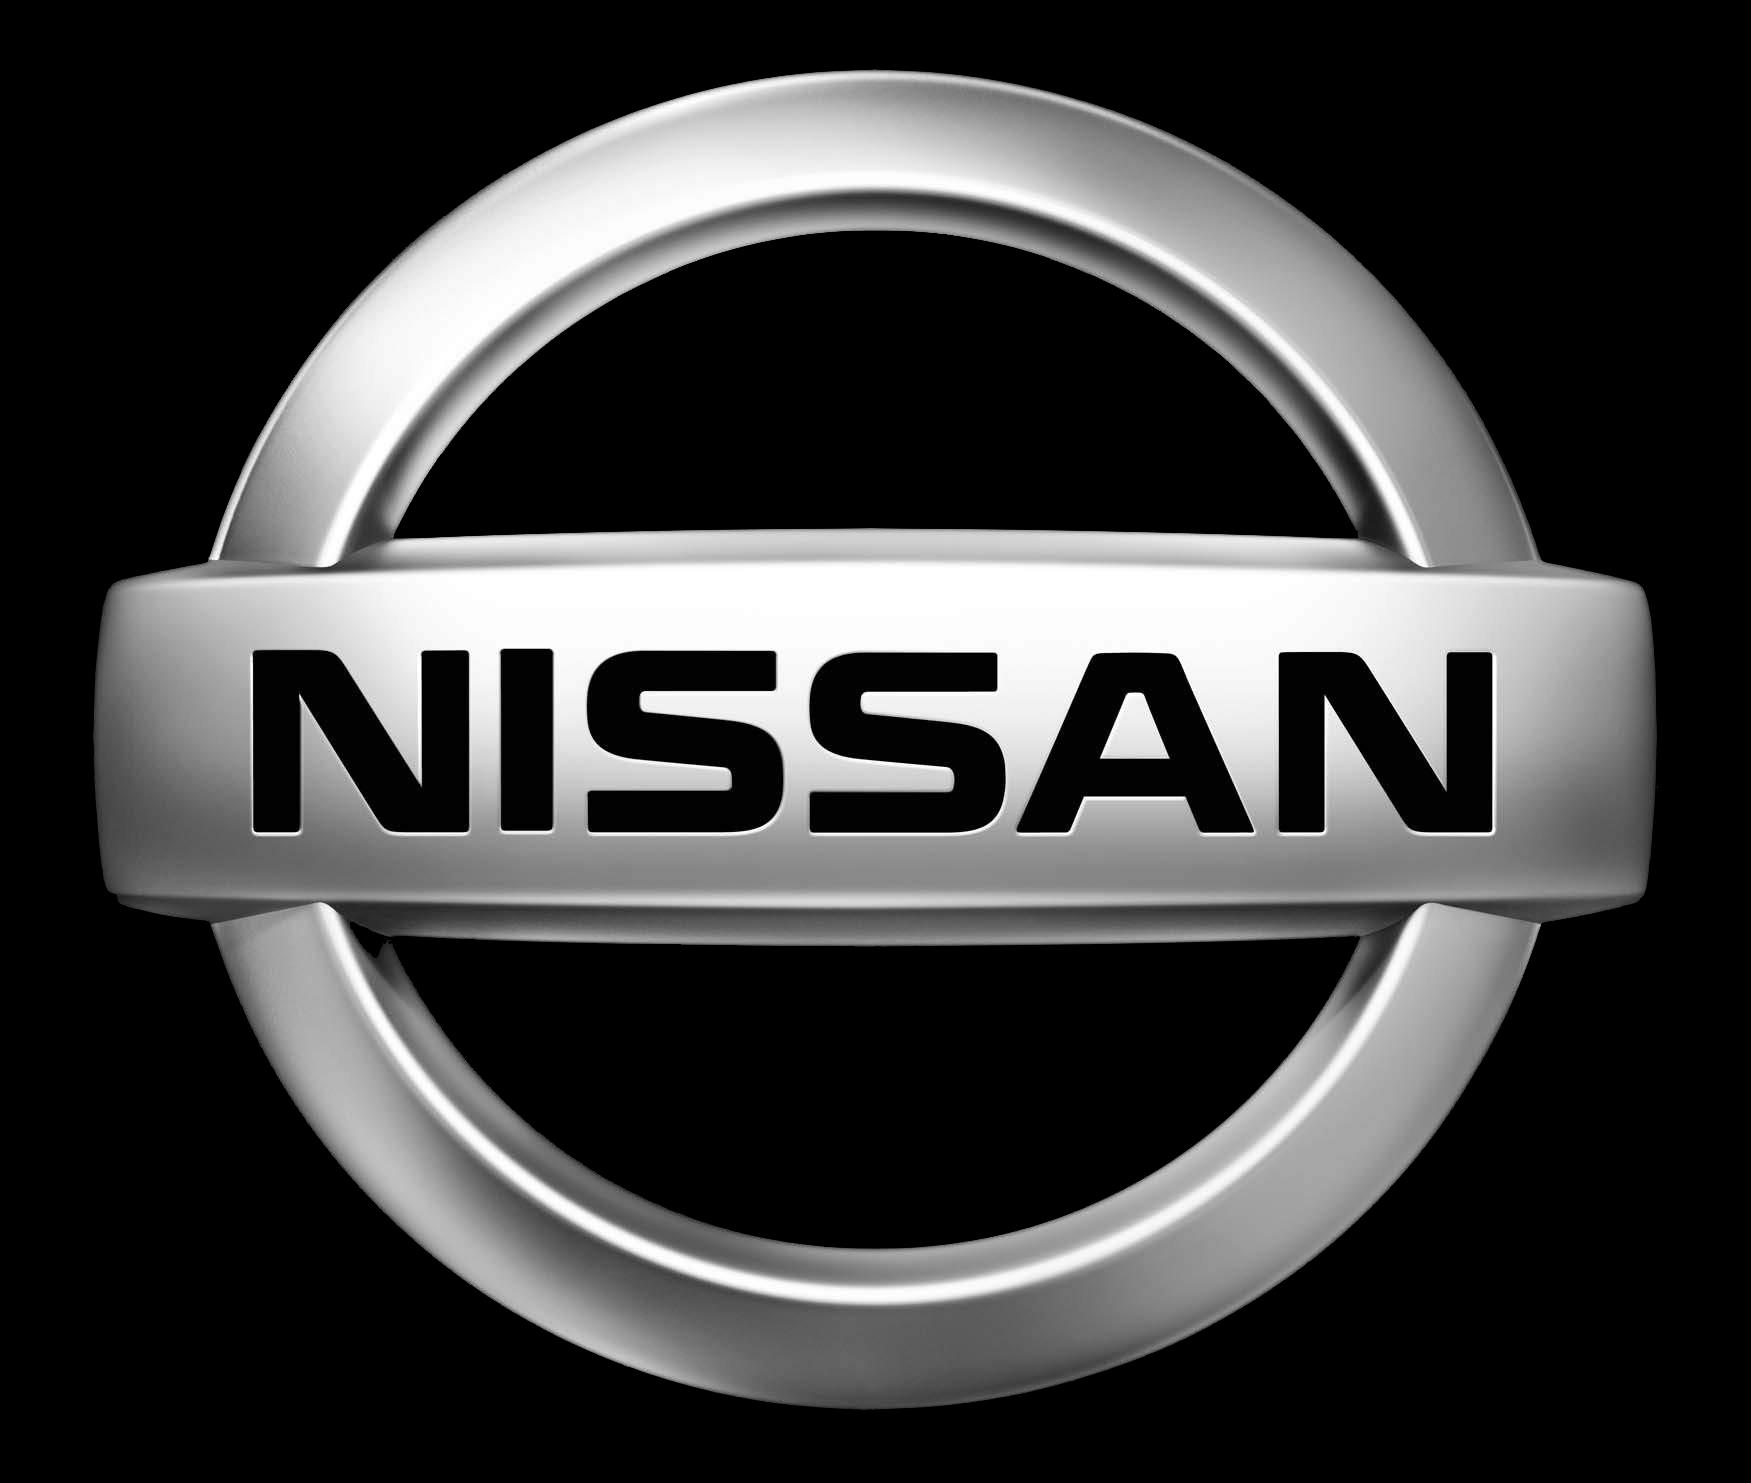 Replacement Auto Keys No Spare Nissan